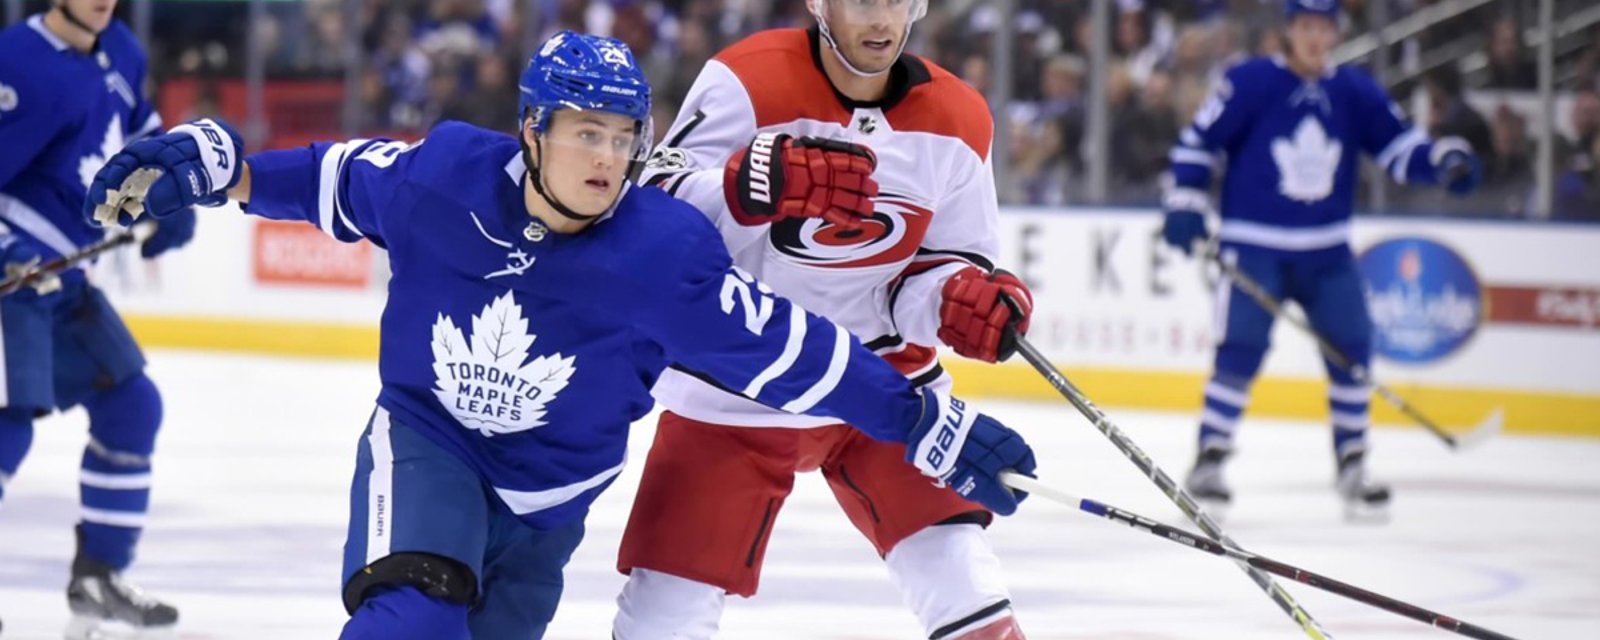 Hurricanes GM Waddell comments on acquiring Nylander from Leafs